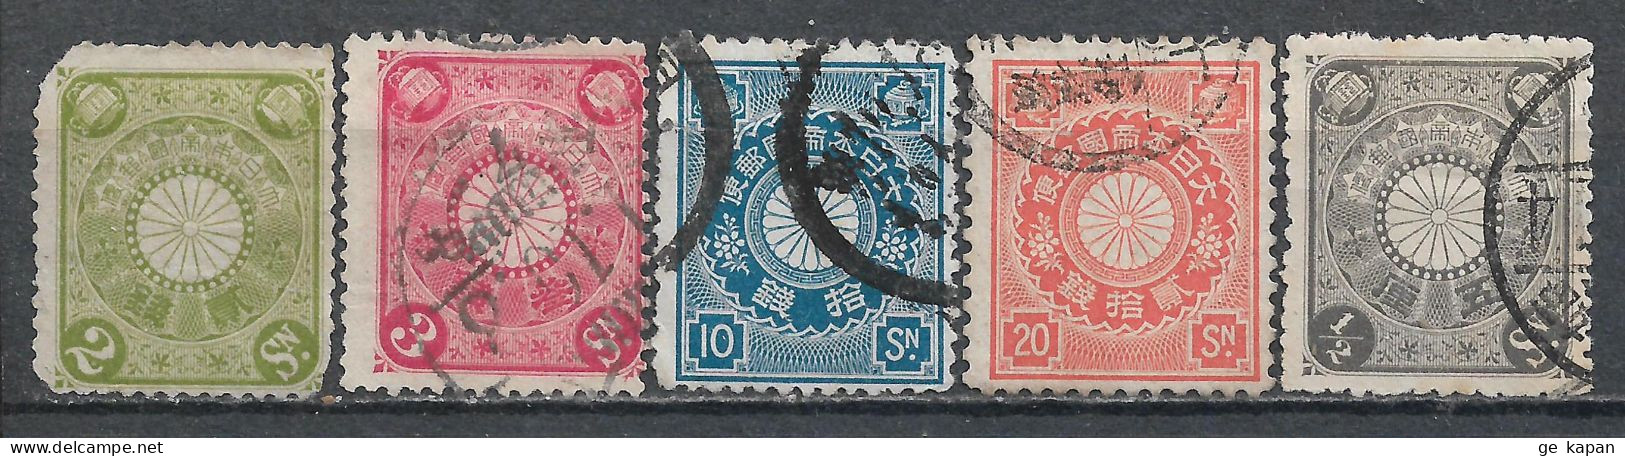 1899-1906 JAPAN Set Of 8 Used Stamps (Michel # 76-78,80,82,84,90,95) CV €4.20 - Used Stamps